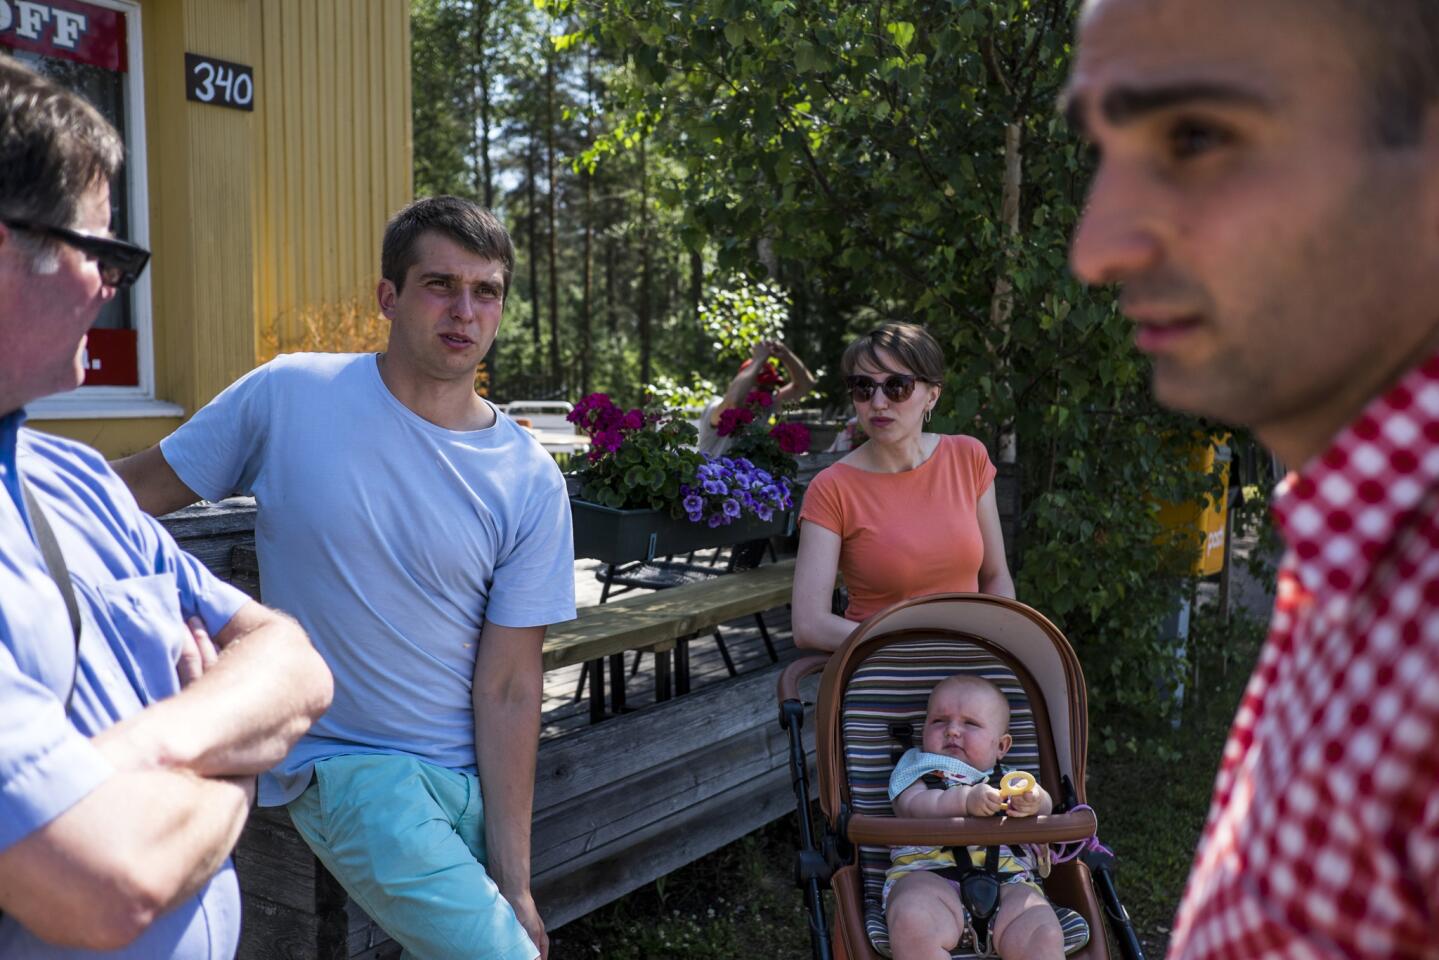 Sergei Kotelnikova, second from left, is shown with his wife, Anya, and their daughter, Emily, at a refugee center in Konnunsuo, Finland. The family fled Russia, as did Alin Tovmasian, right, after Jehovah's Witnesses were labeled extremists there and their faith was banned. At left is Harri Ikonen, a member of the Jehovah’s Witnesses community in Konnunsuo.